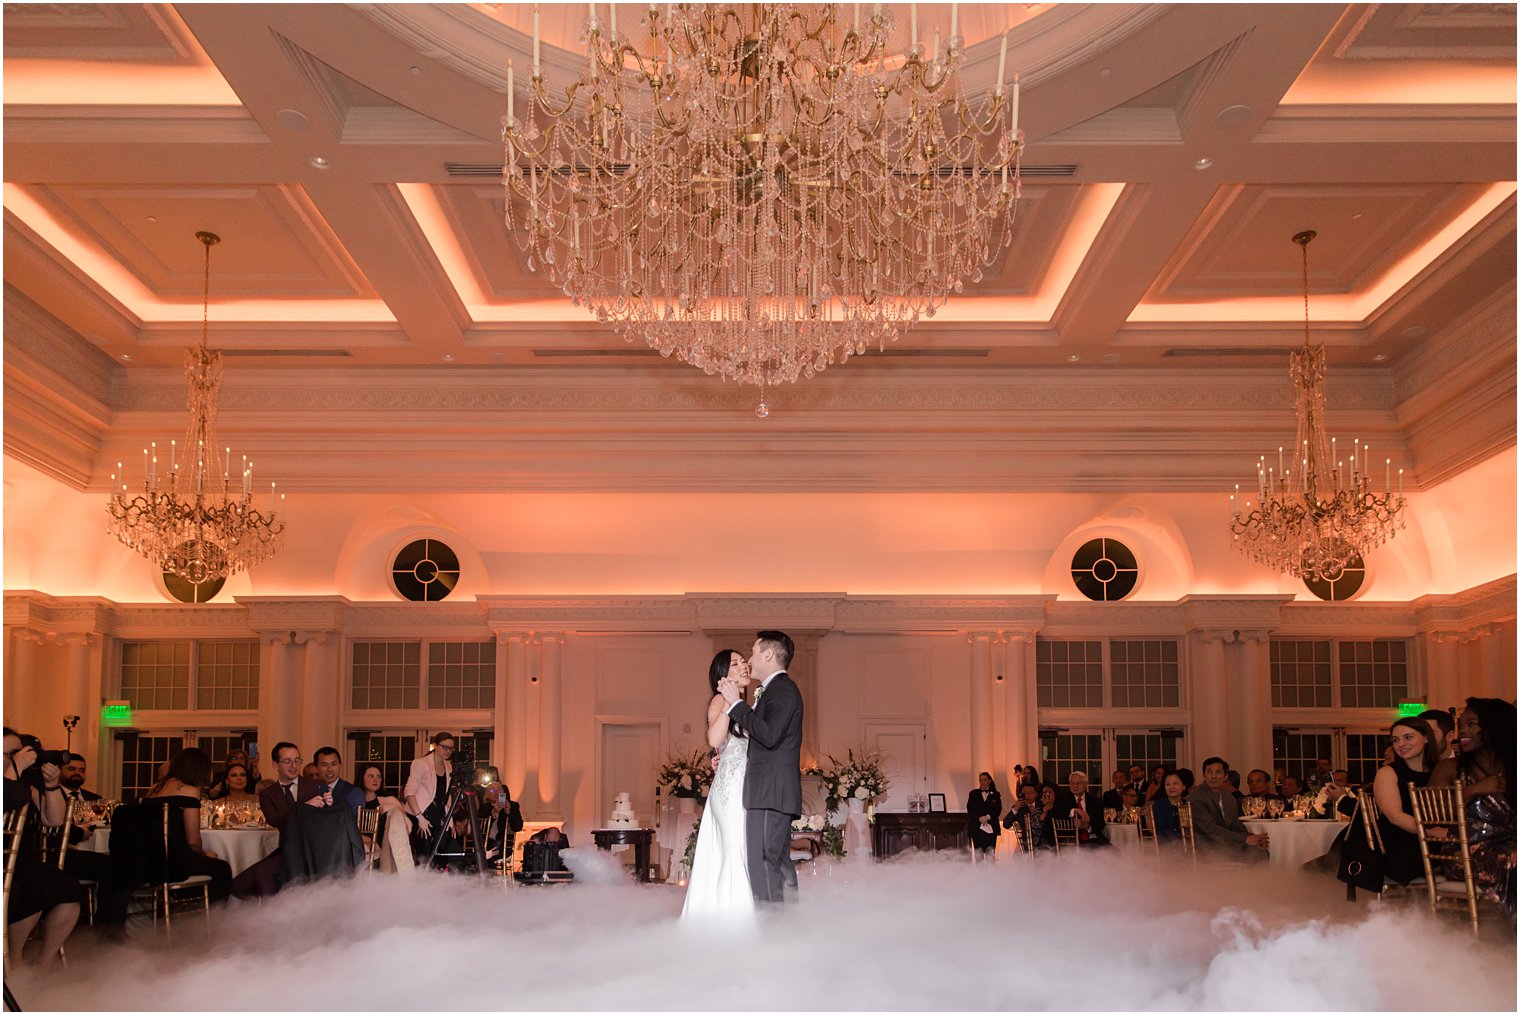 Bride and groom dancing in the clouds